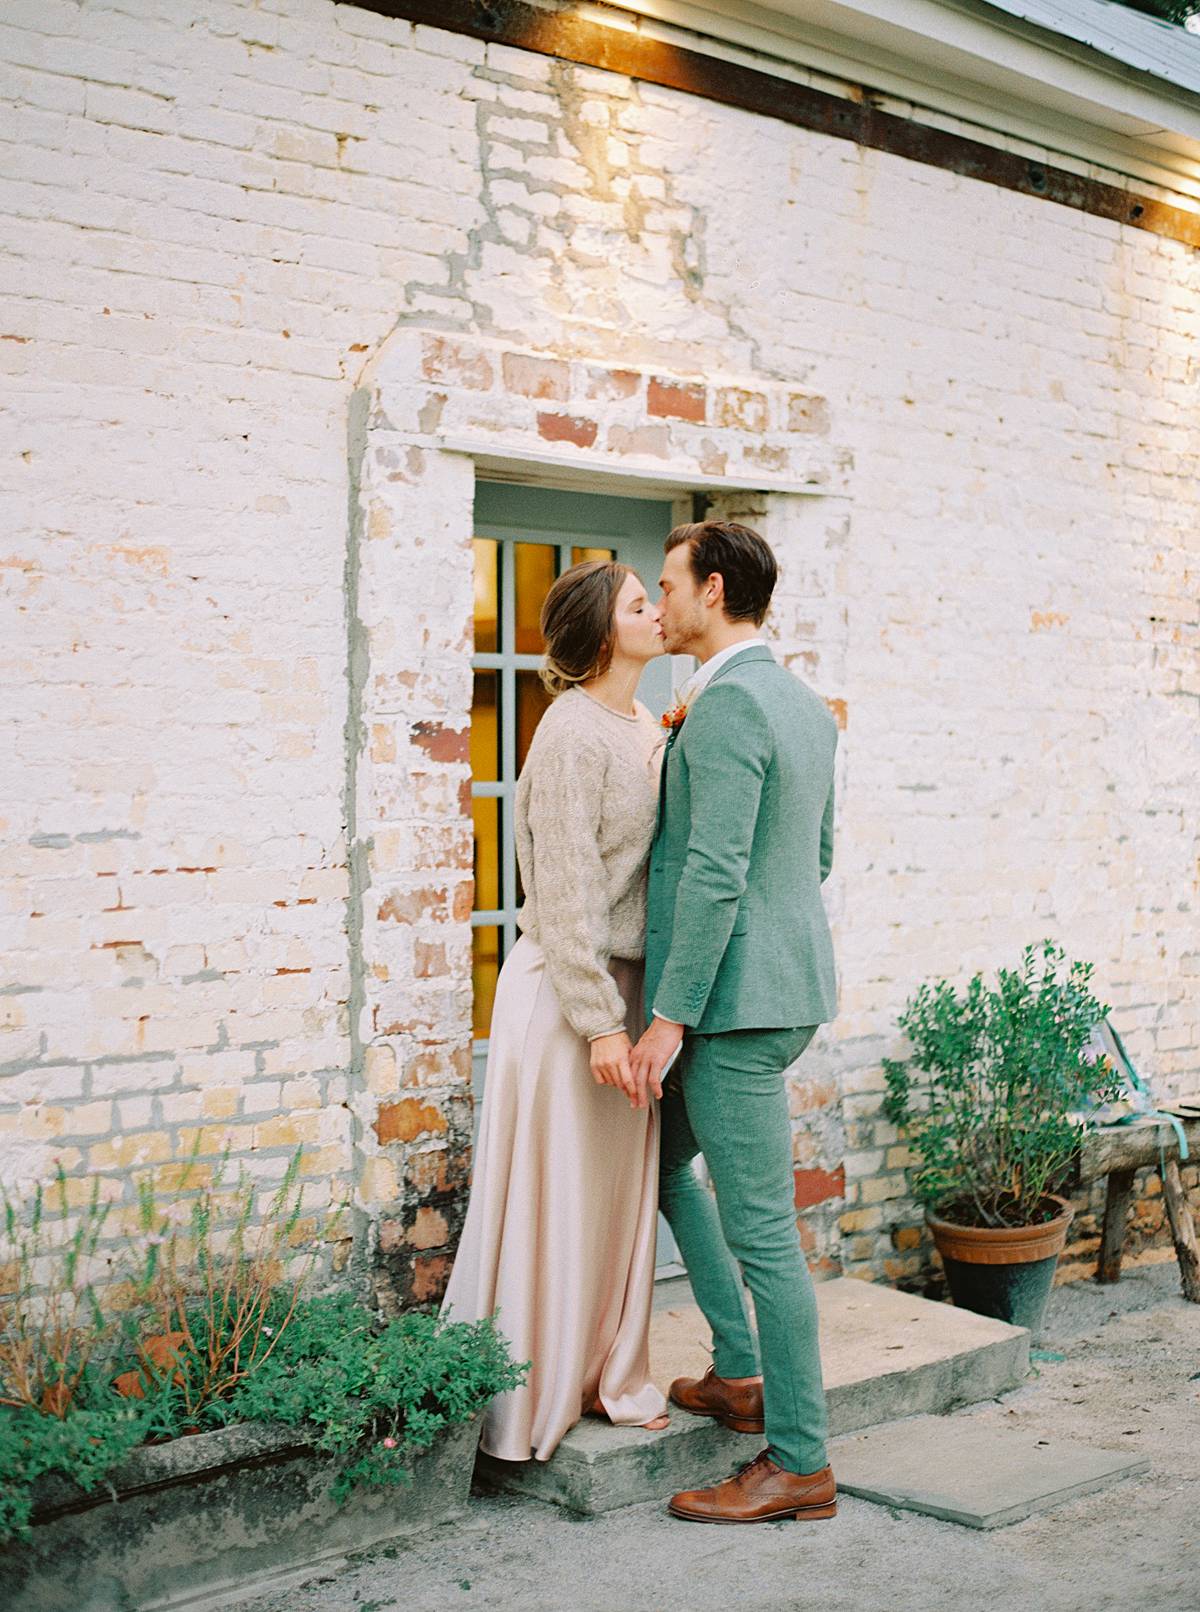 wavering place charleston and columbia south carolina wedding venue intimate elopement with bride and groom fashion